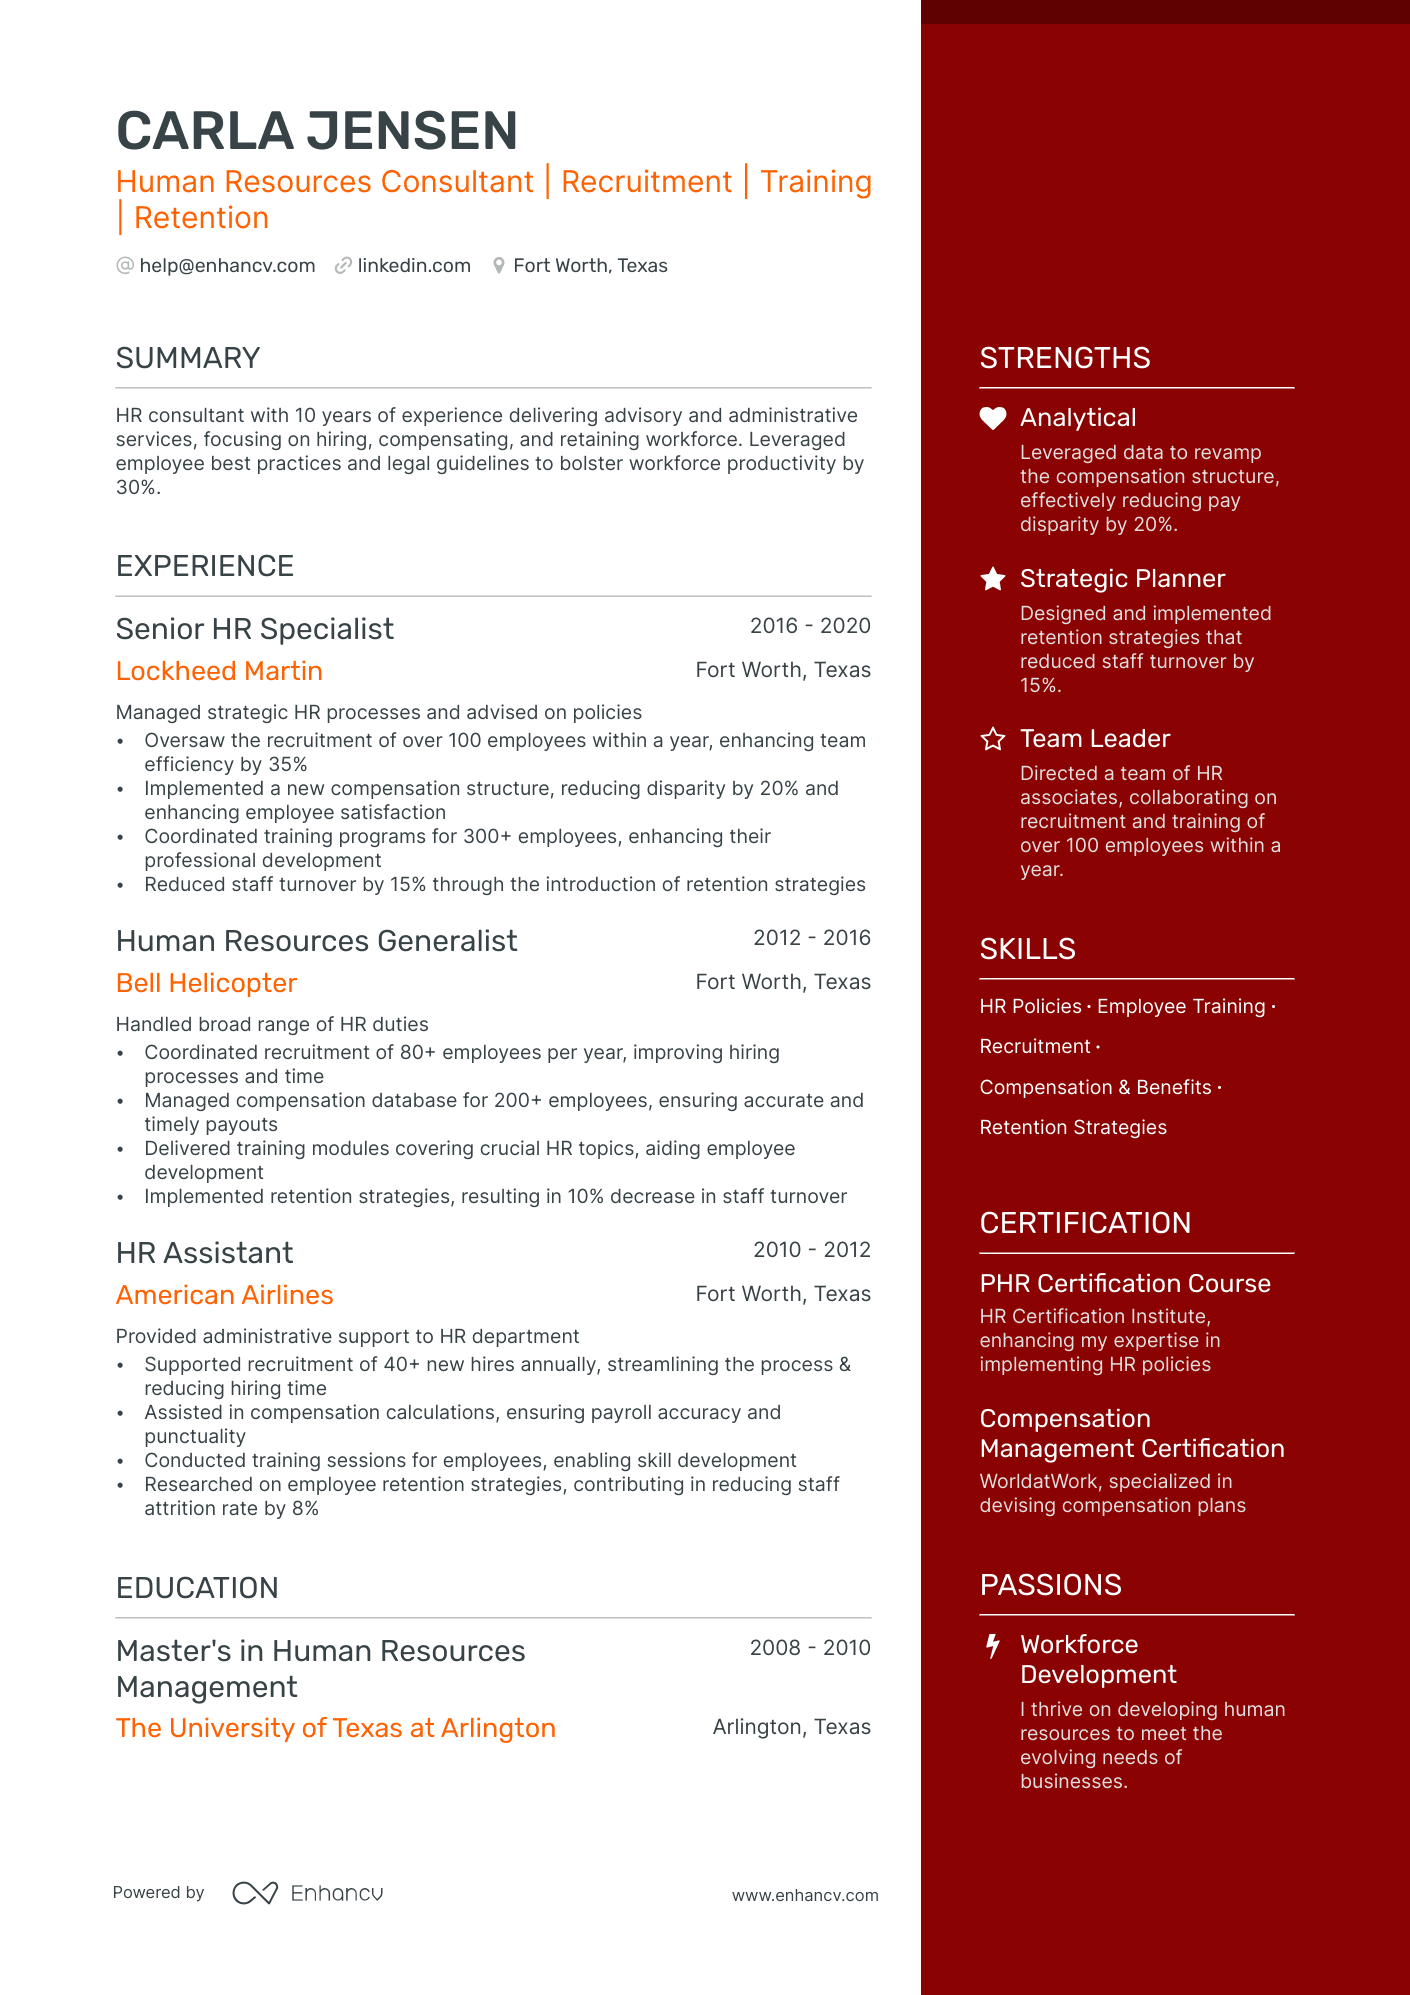 Human Resources Consultant resume example